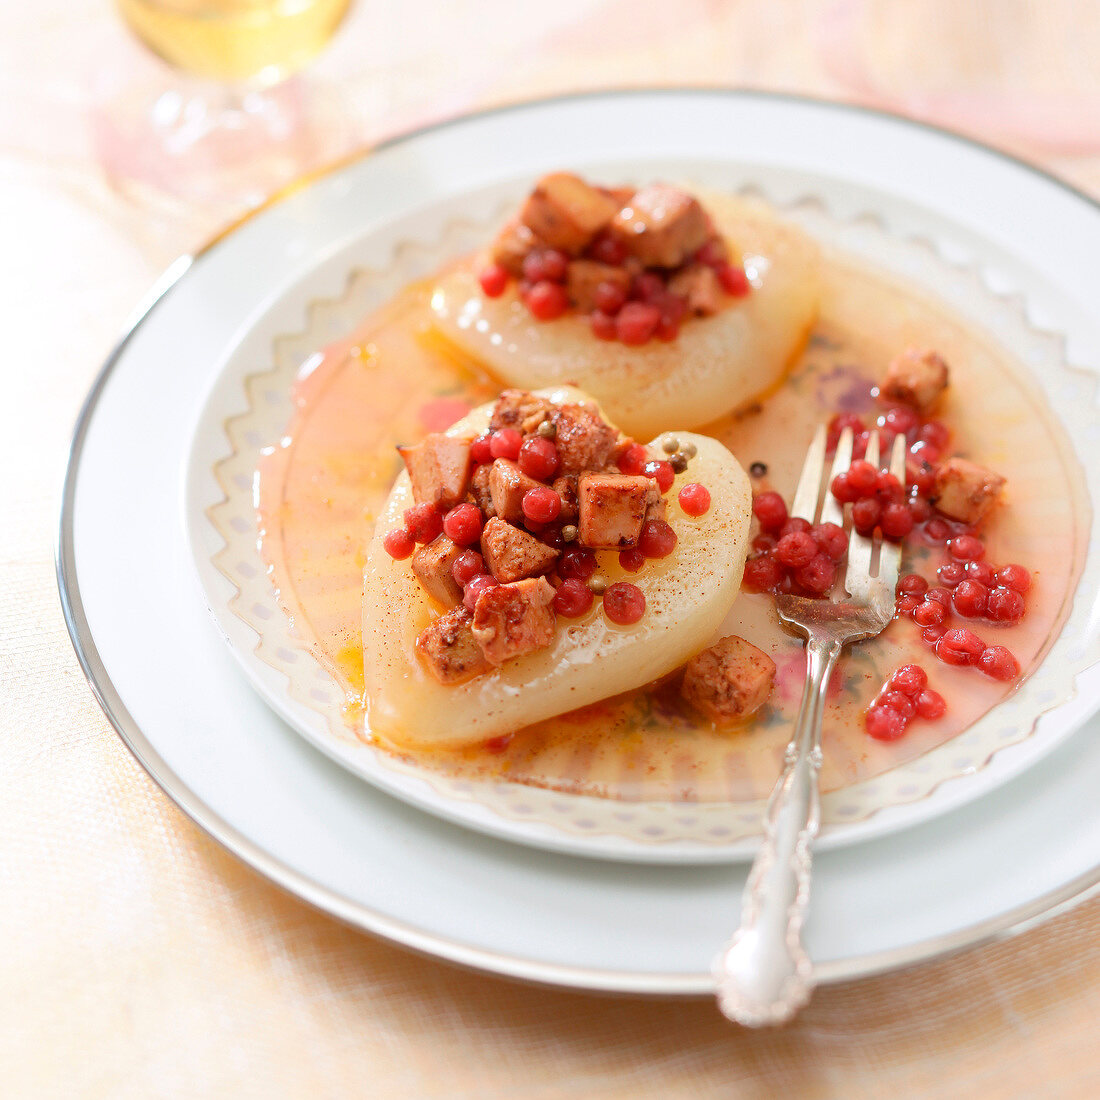 Pears garnished with foie gras and cranberries